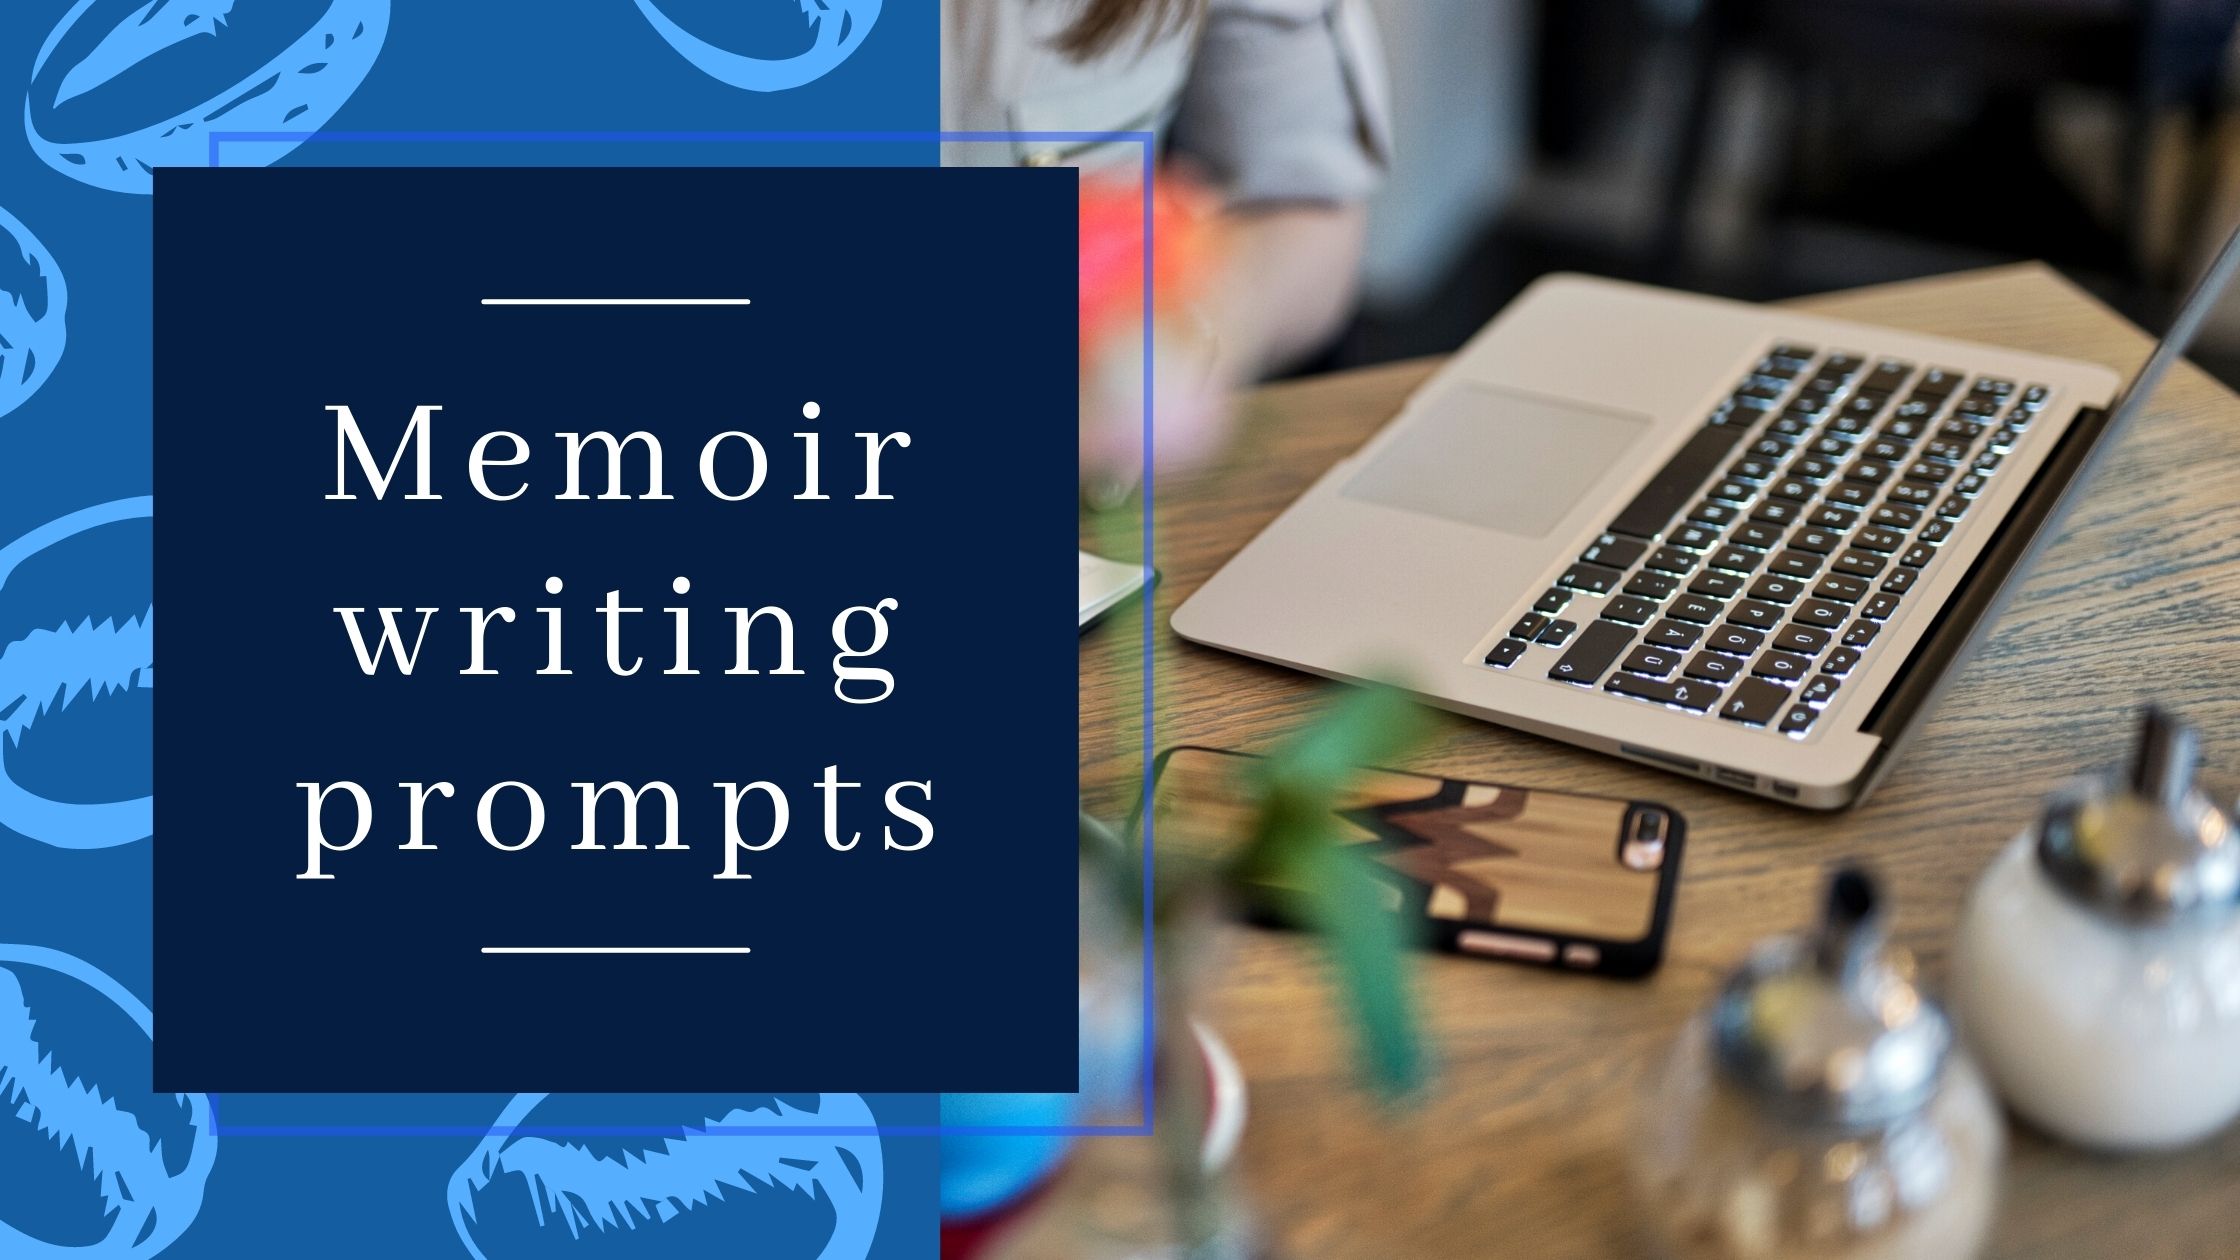 75 Memoir writing prompts to help guide someone when they begin thinking about their own memoir.